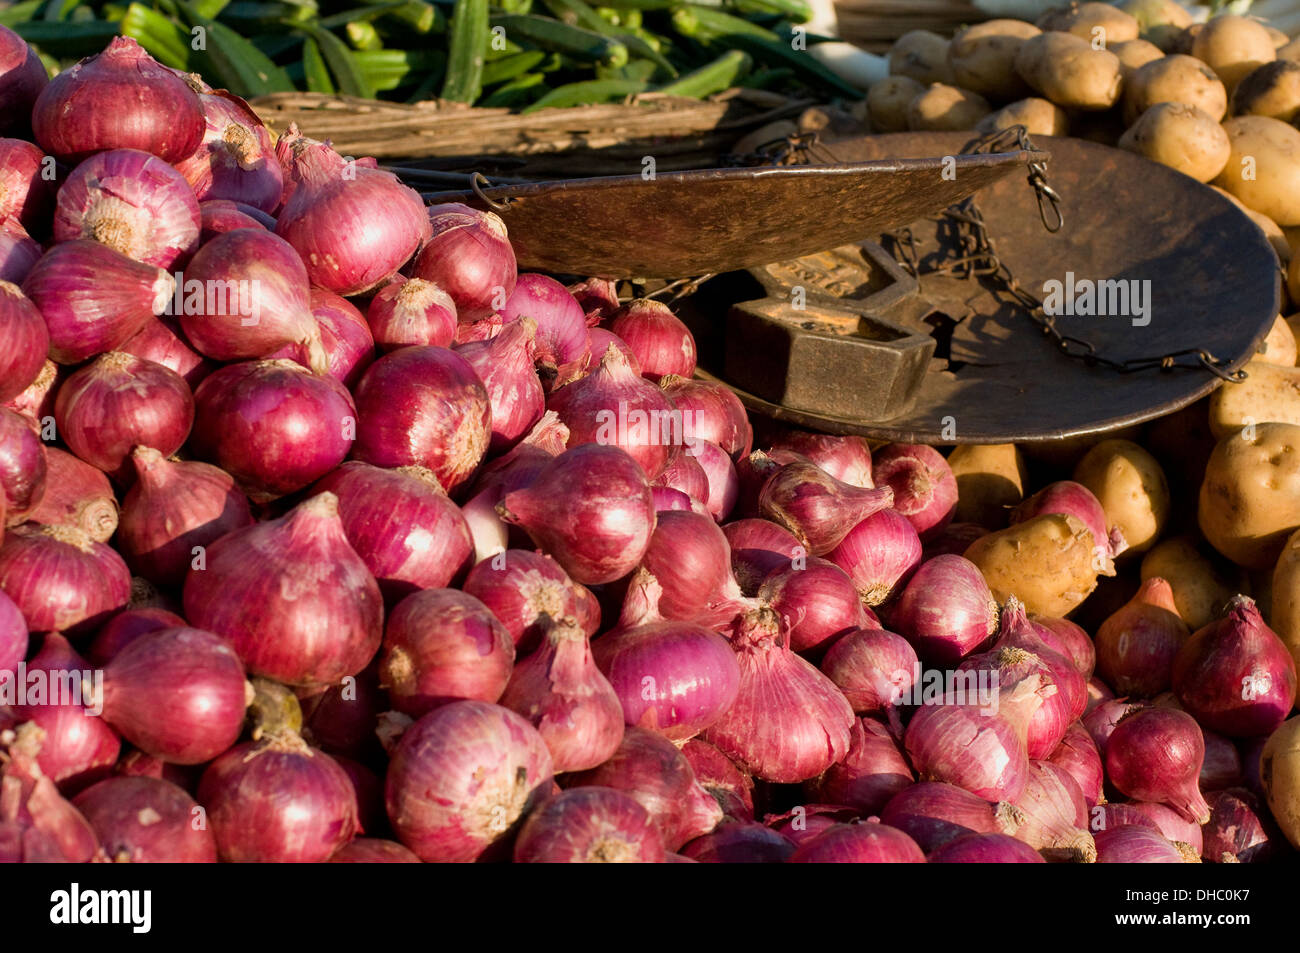 https://c8.alamy.com/comp/DHC0K7/glorious-pile-of-red-onions-piled-high-at-puttaparthi-village-market-DHC0K7.jpg